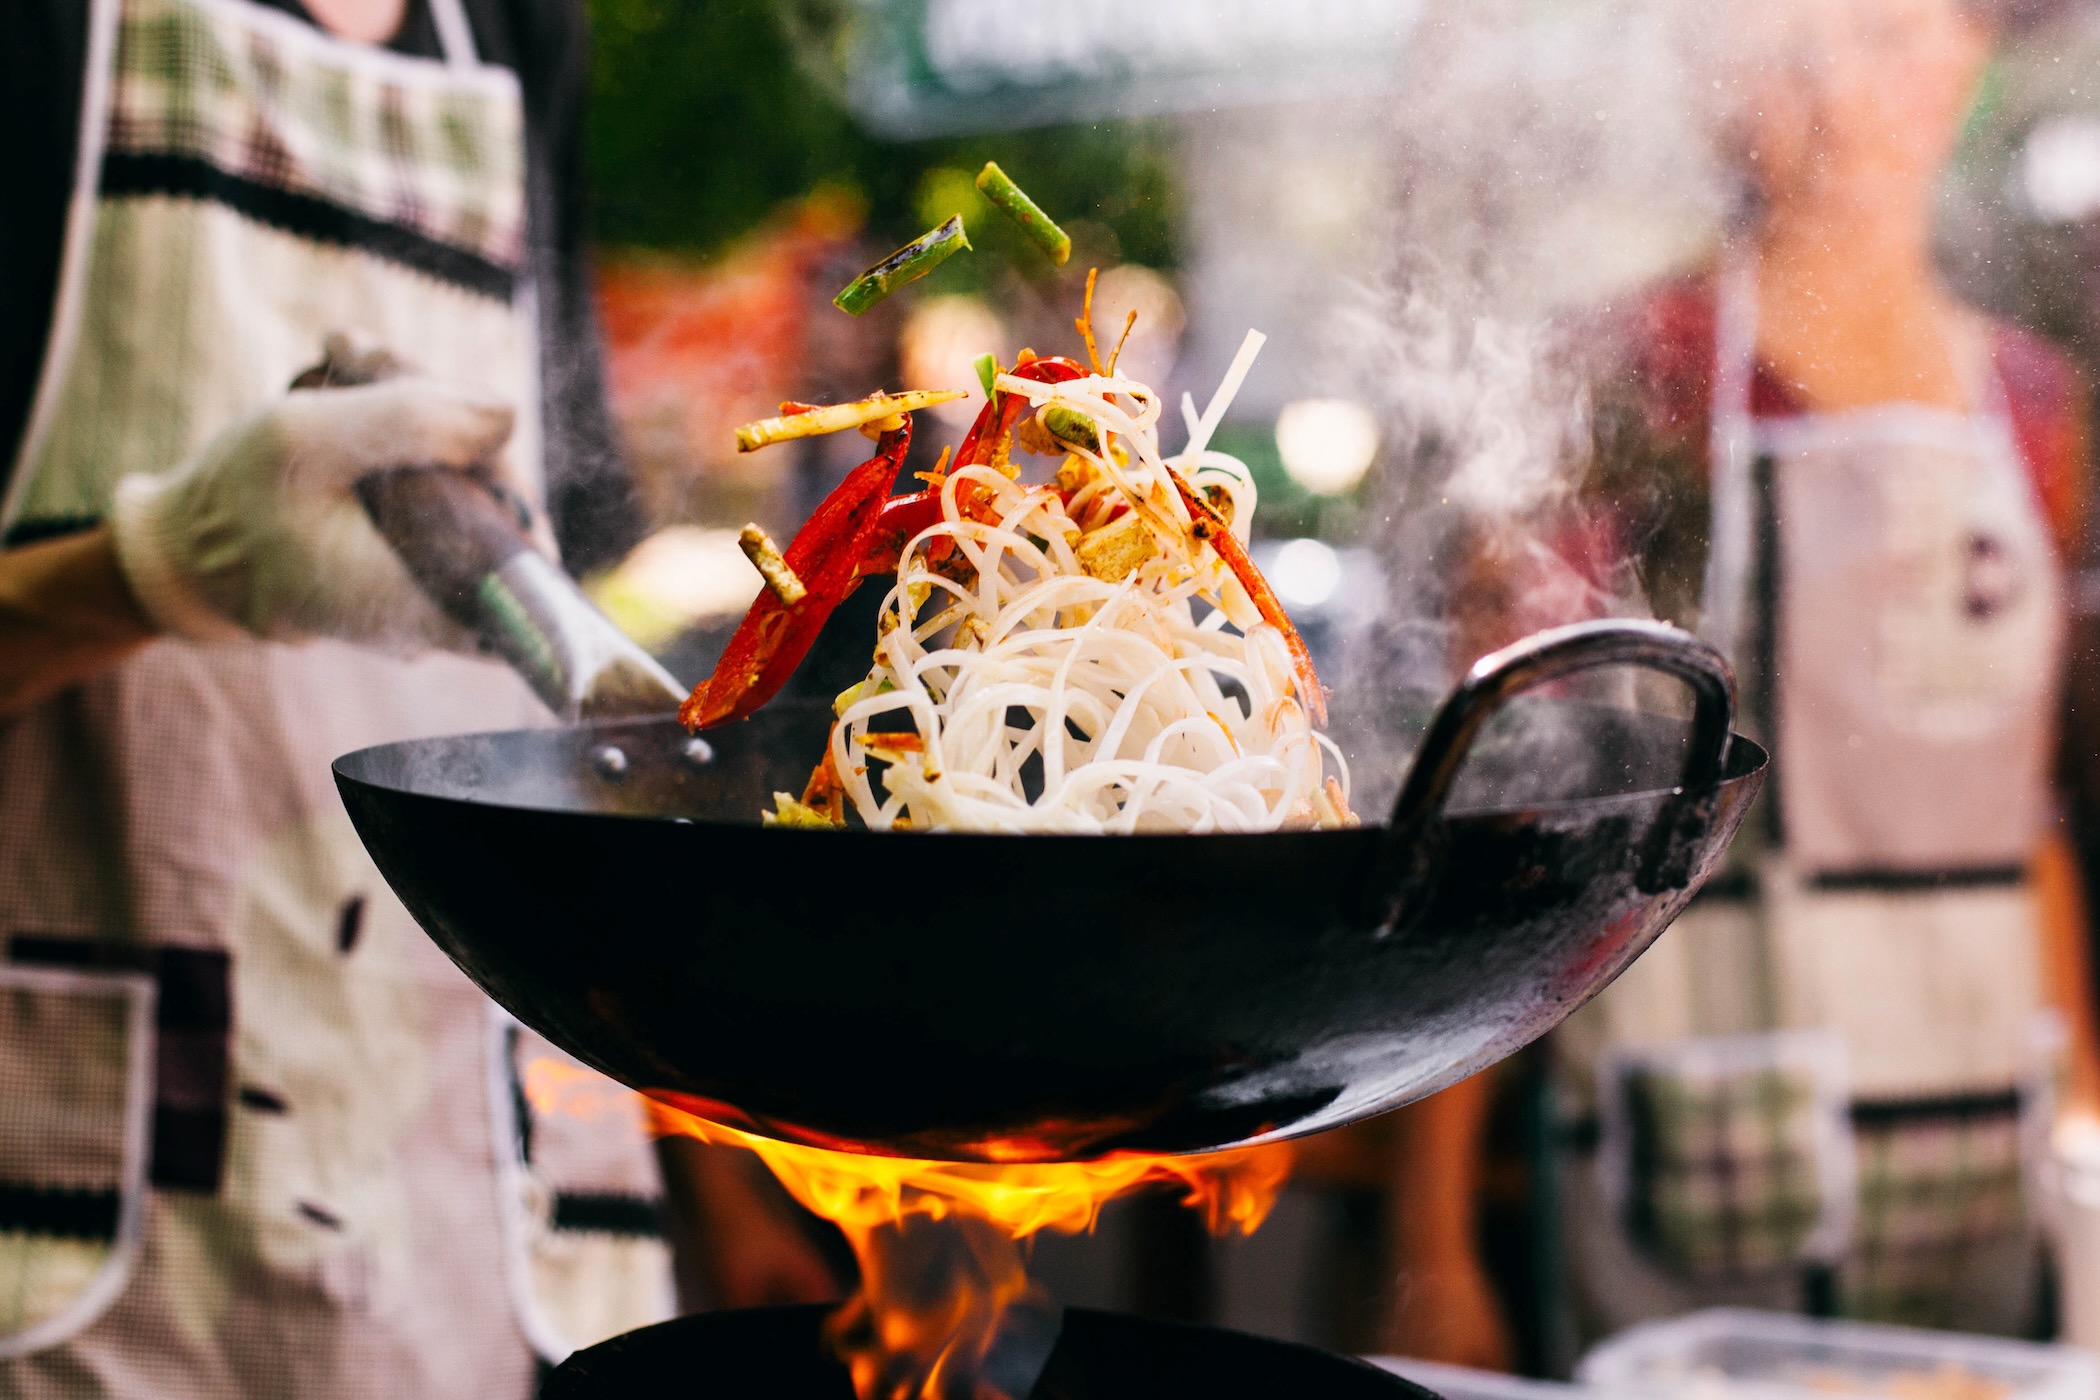 The History of the Wok